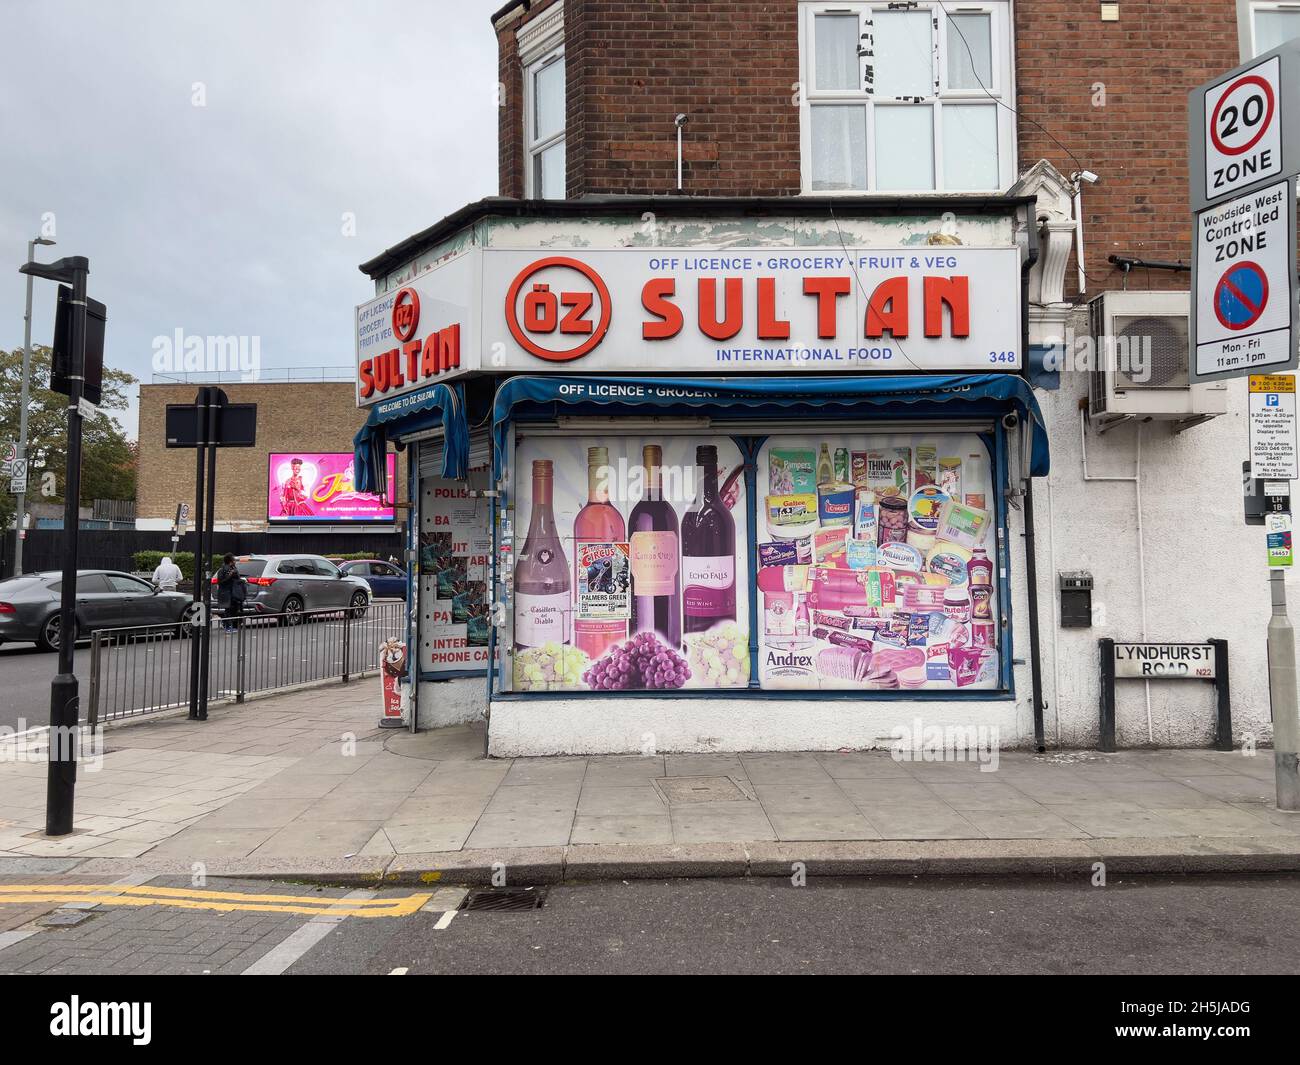 London / UK - 5th November 2021 - Sultan Polish off licence and grocery shop exterior Stock Photo